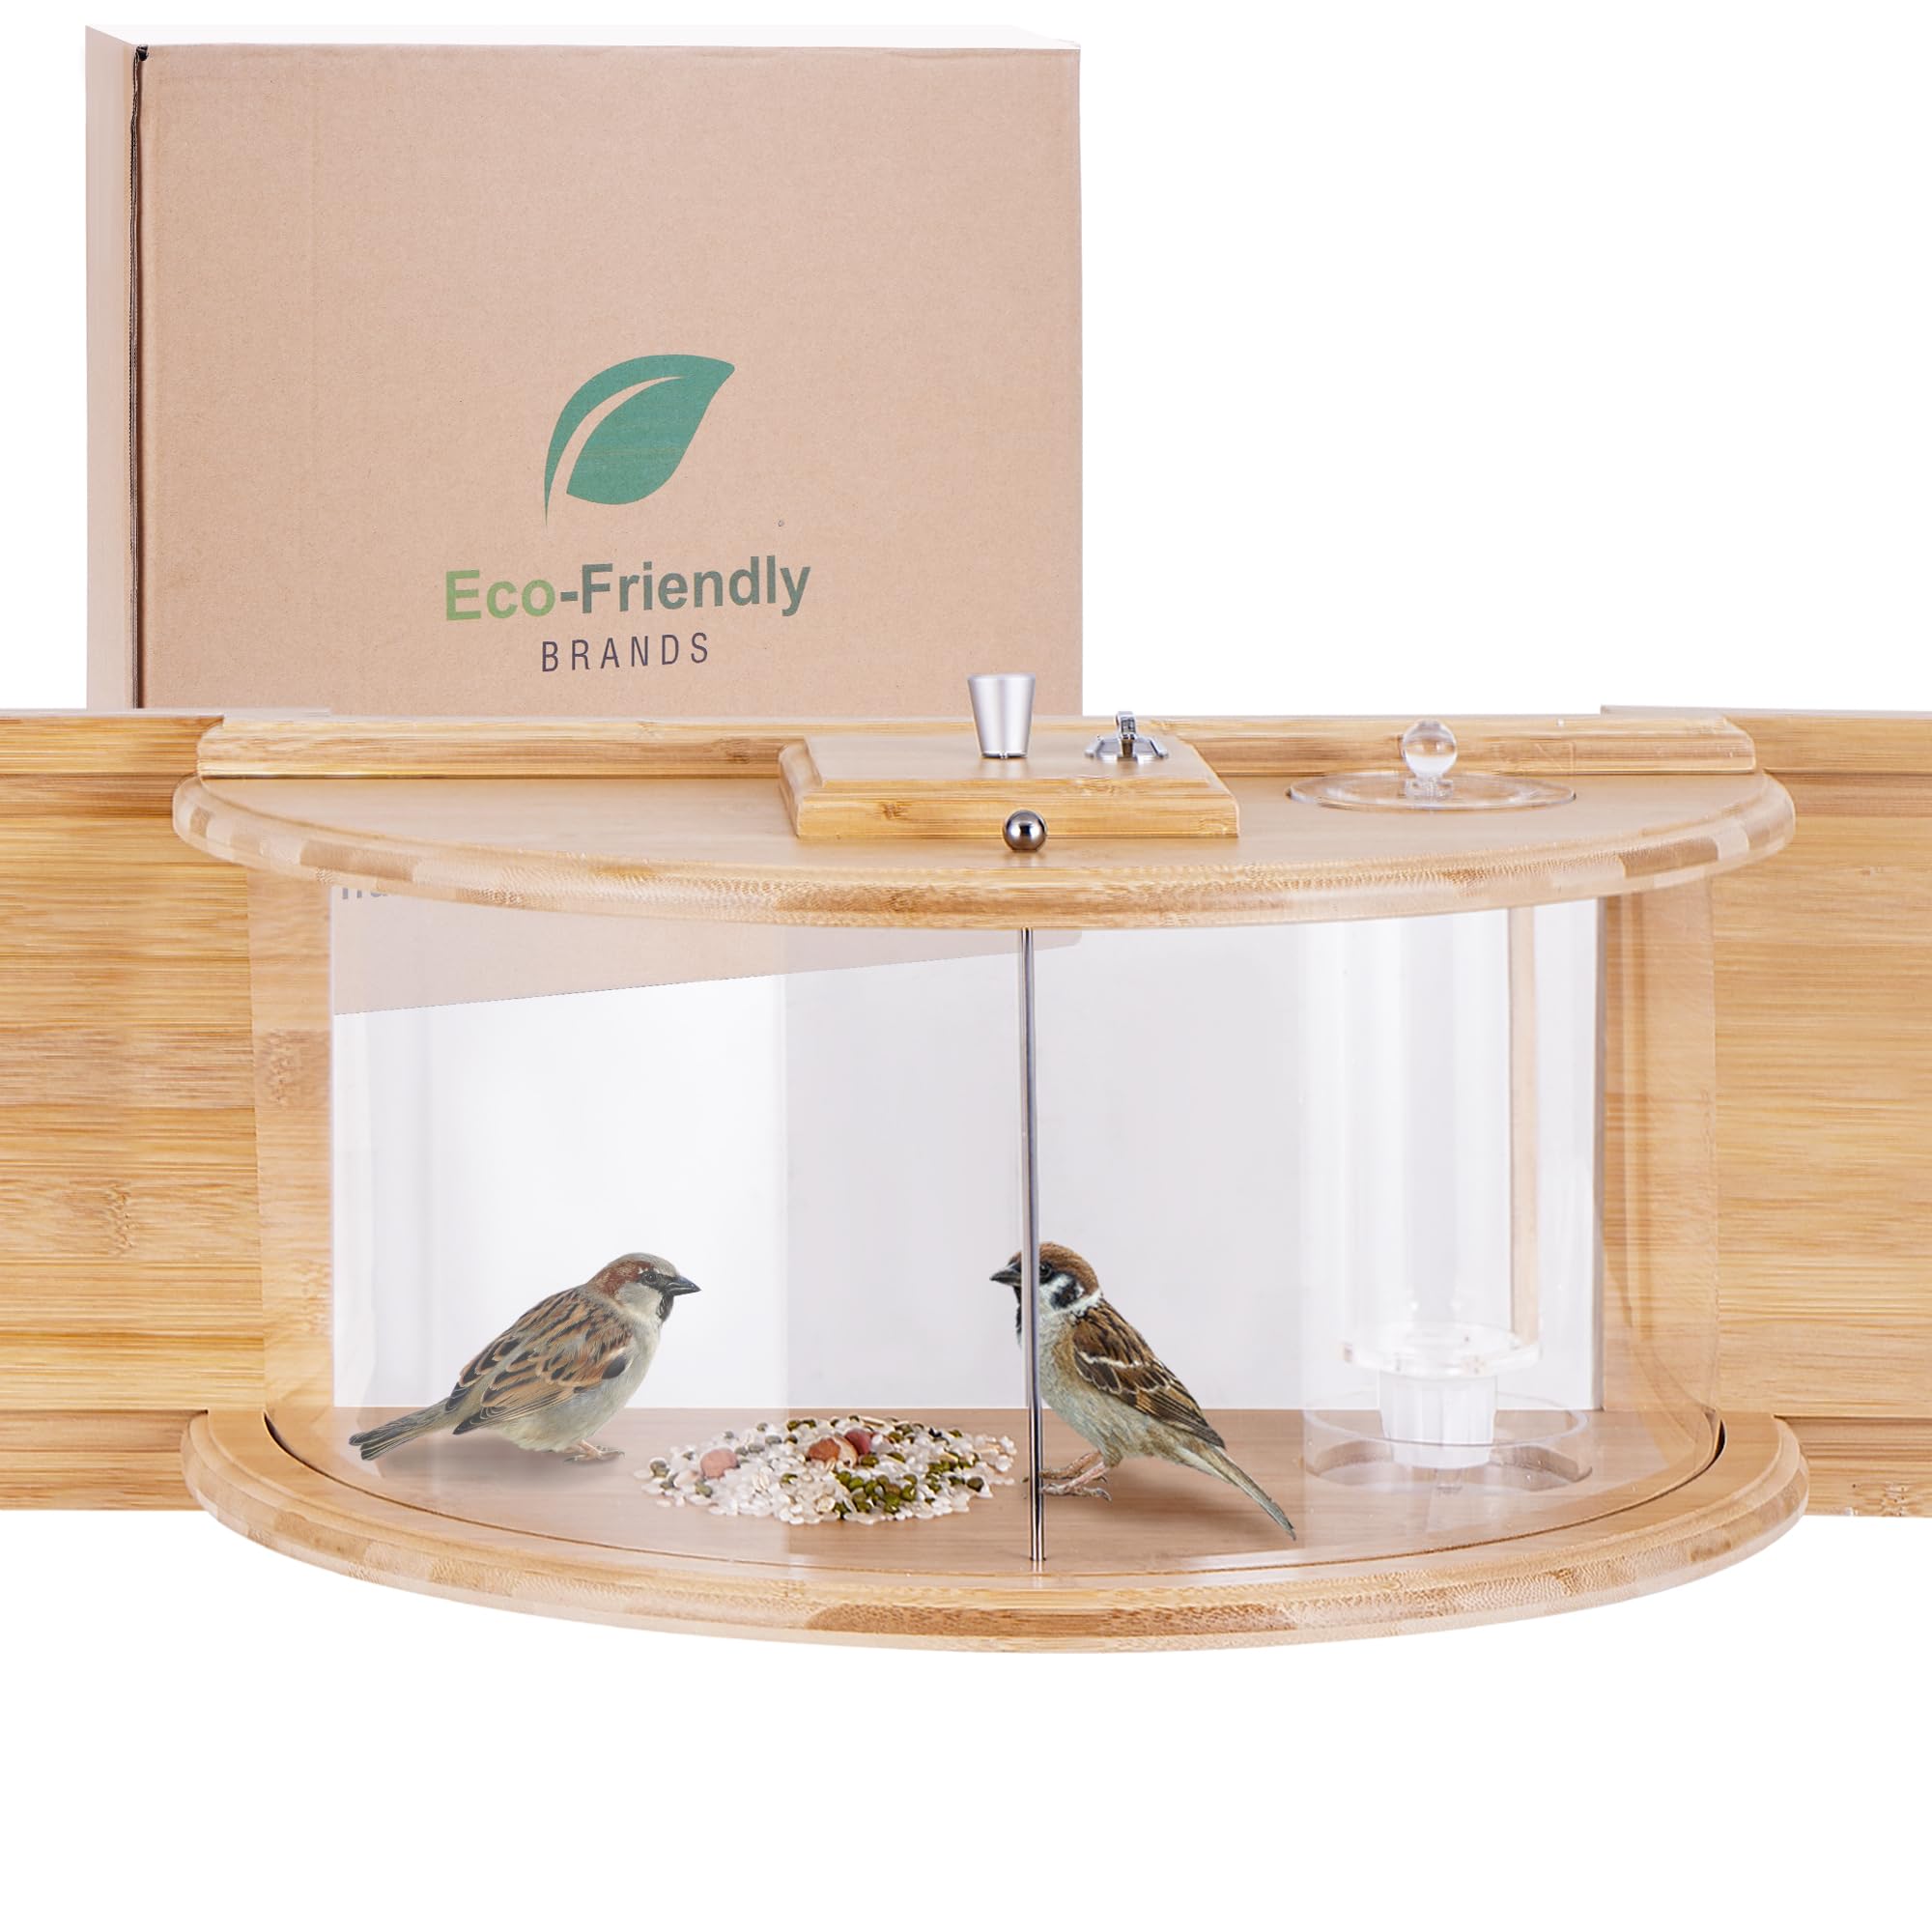 Eco-Friendly Window Bird Feeder with Waterer: Enjoy Watching Birds from The Comfort of Your Own Home While Reducing Your Environmental Impact - Durable and Long-Lasting Feeder with Large Capacity